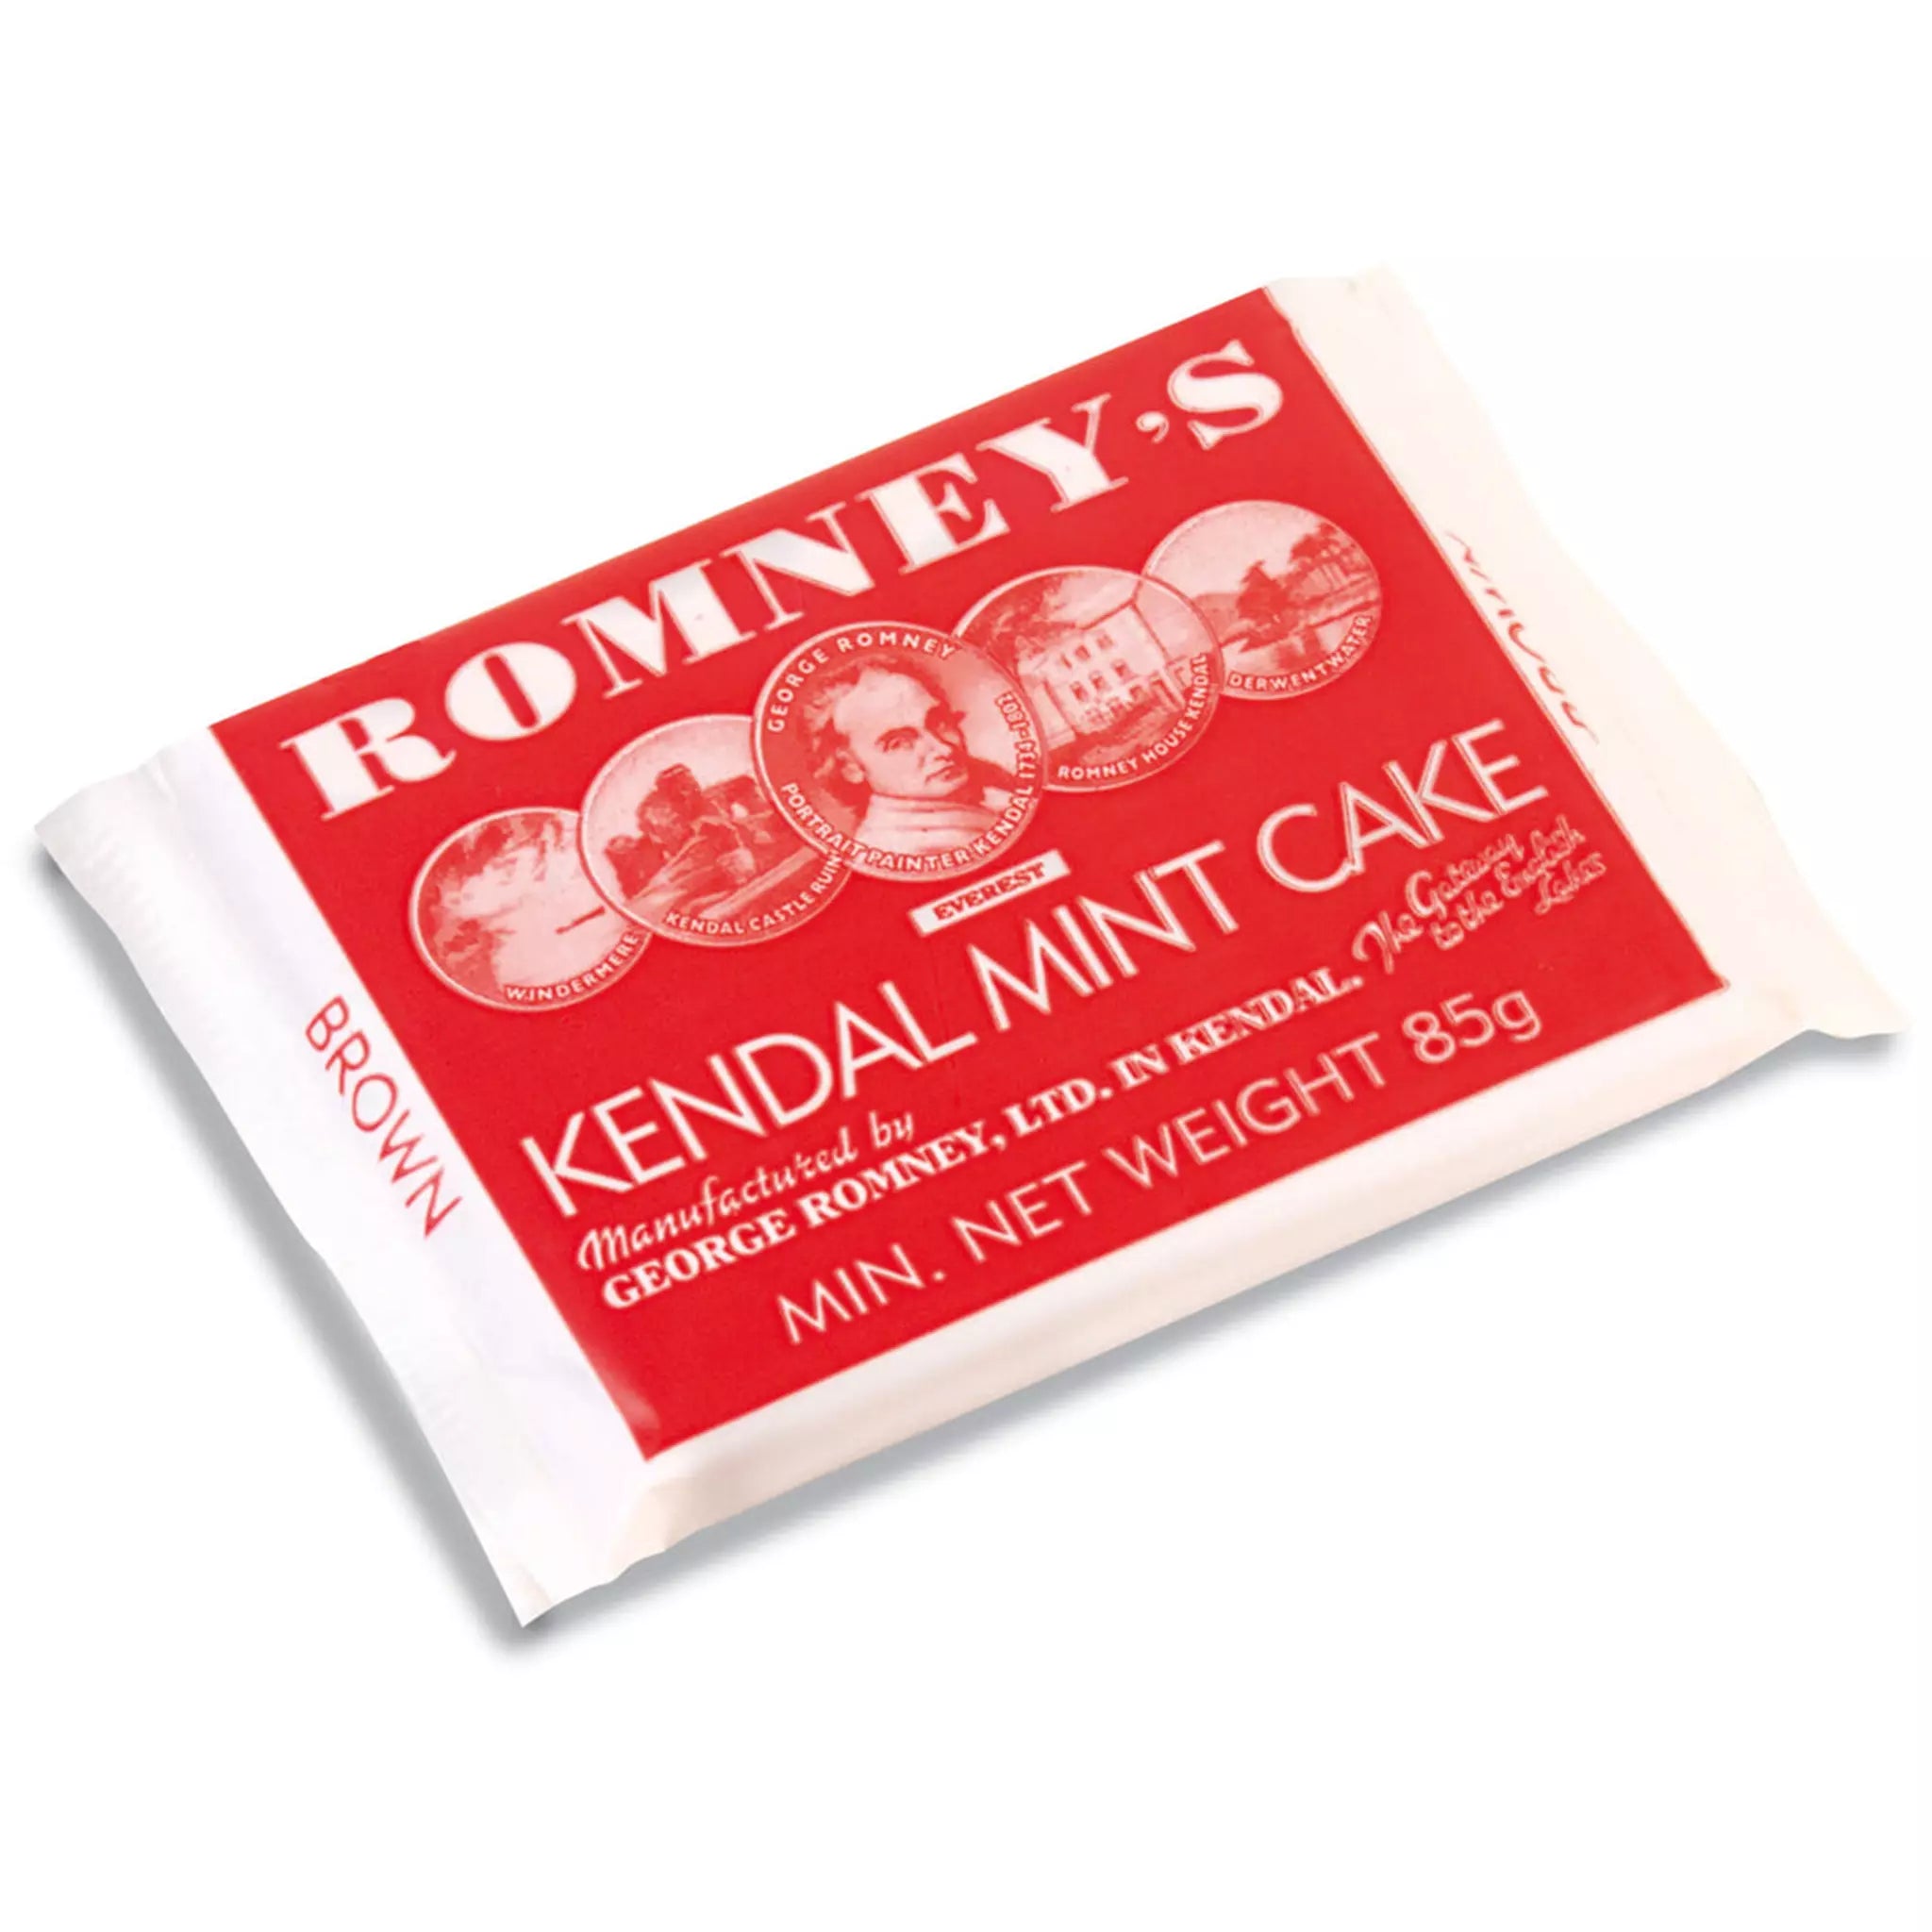 85g bars of Romney's Brown Kendal Mint Cake which is in a red and white wrapper.